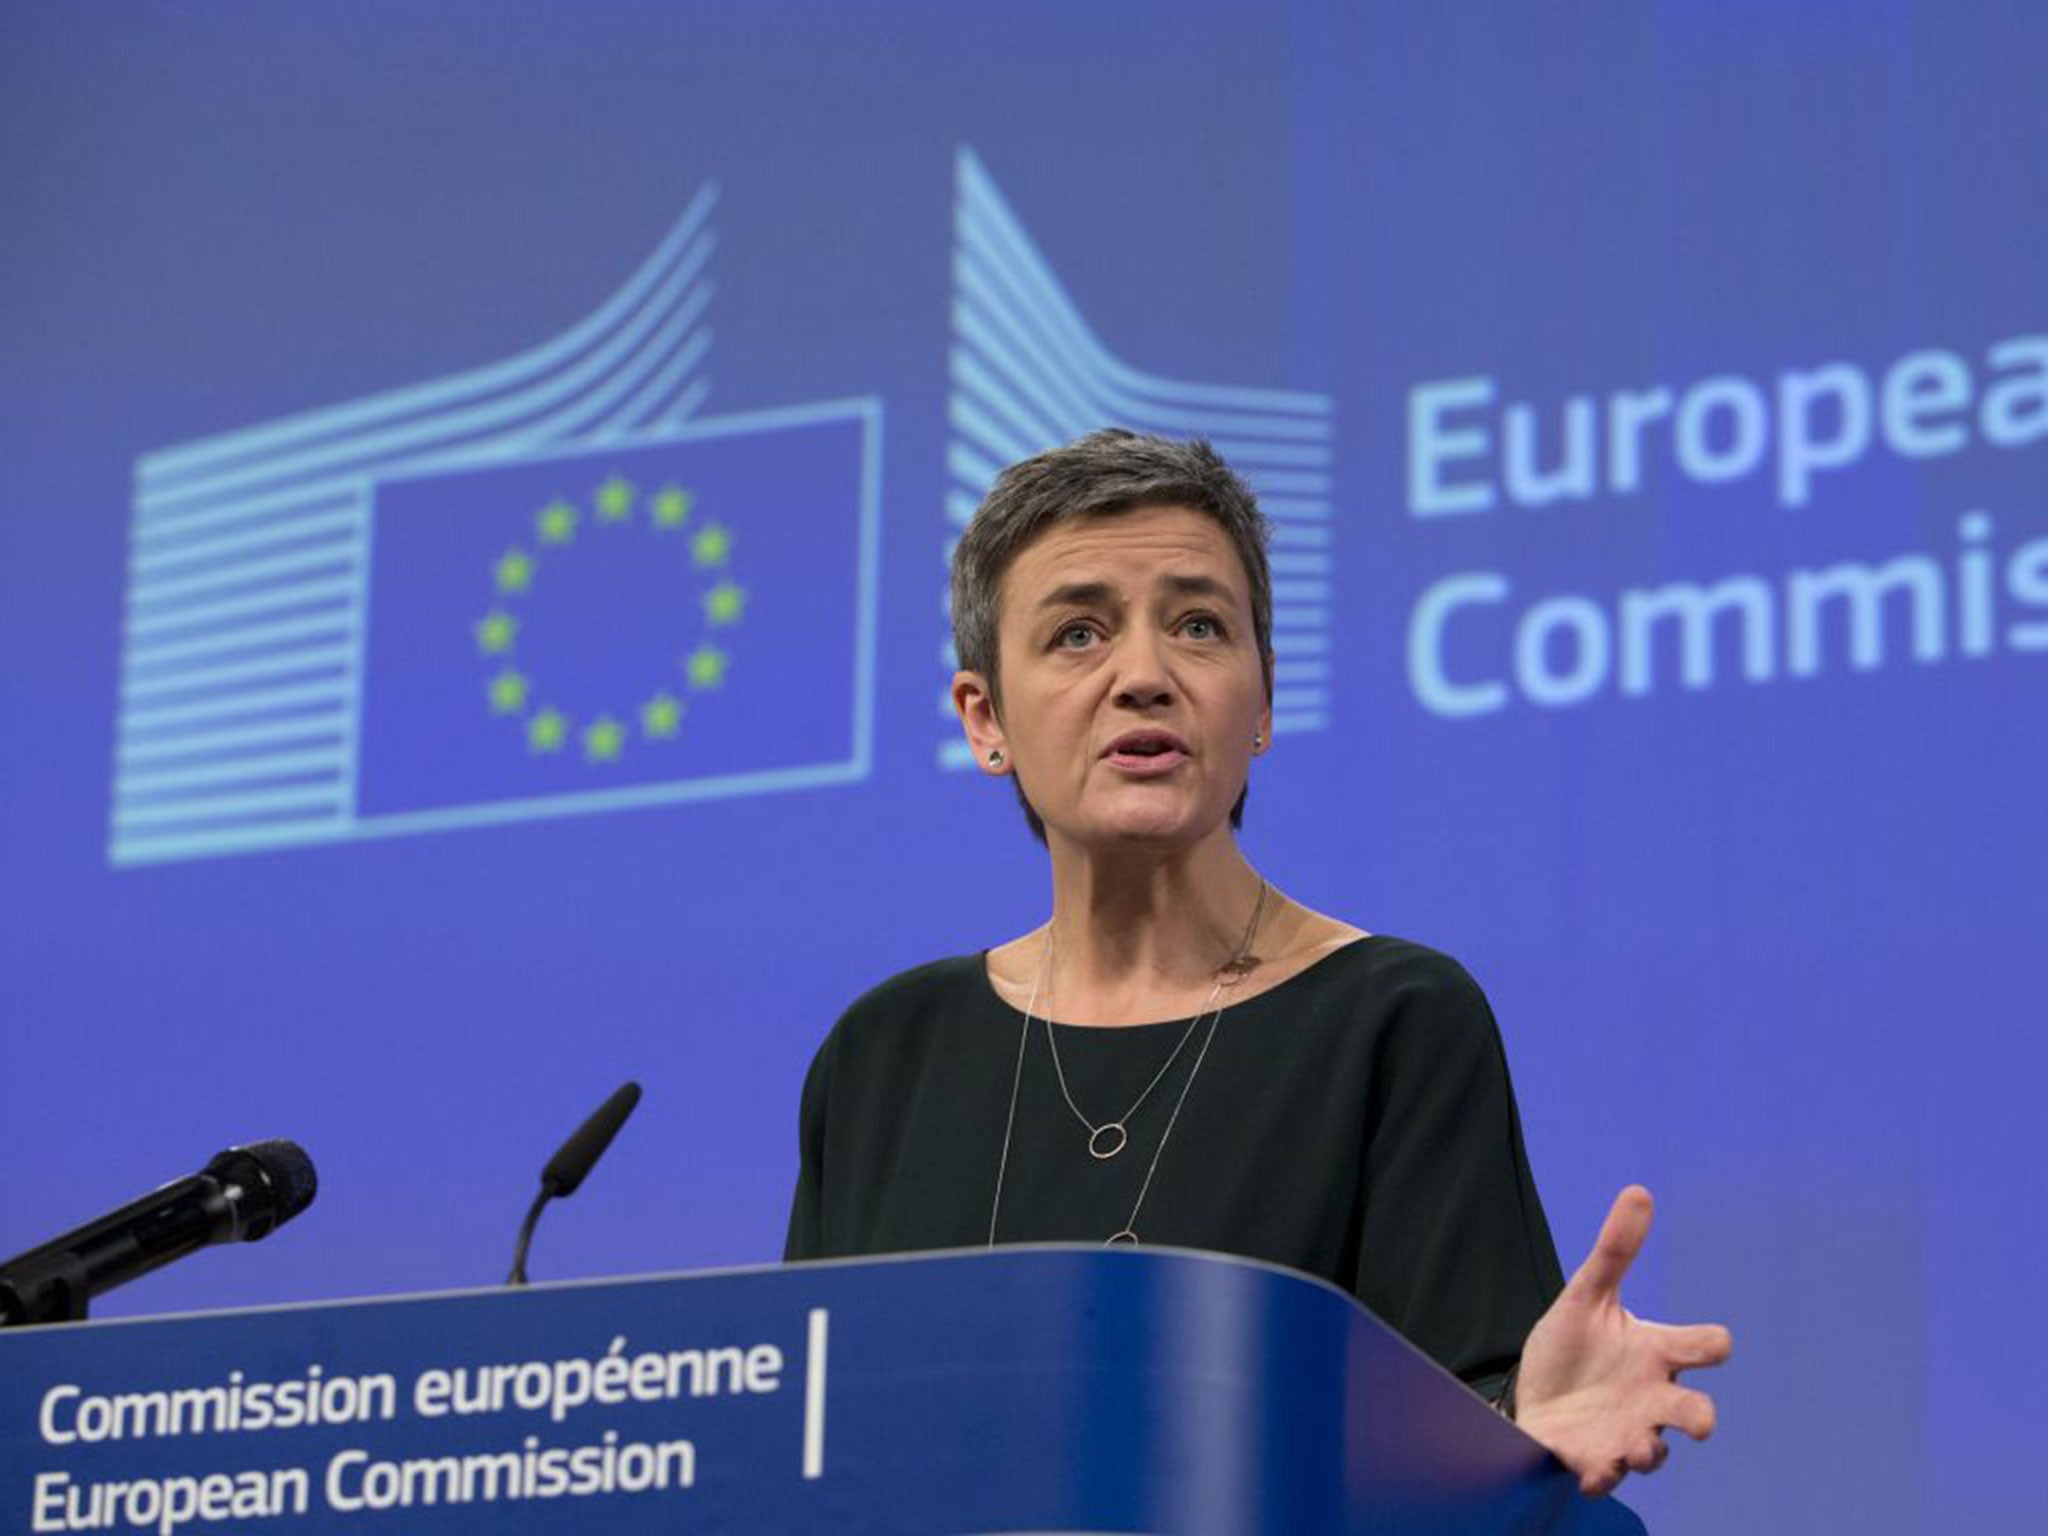 &#13;
Margrethe Vestager at the EU headquarters in Brussels on Wednesday &#13;